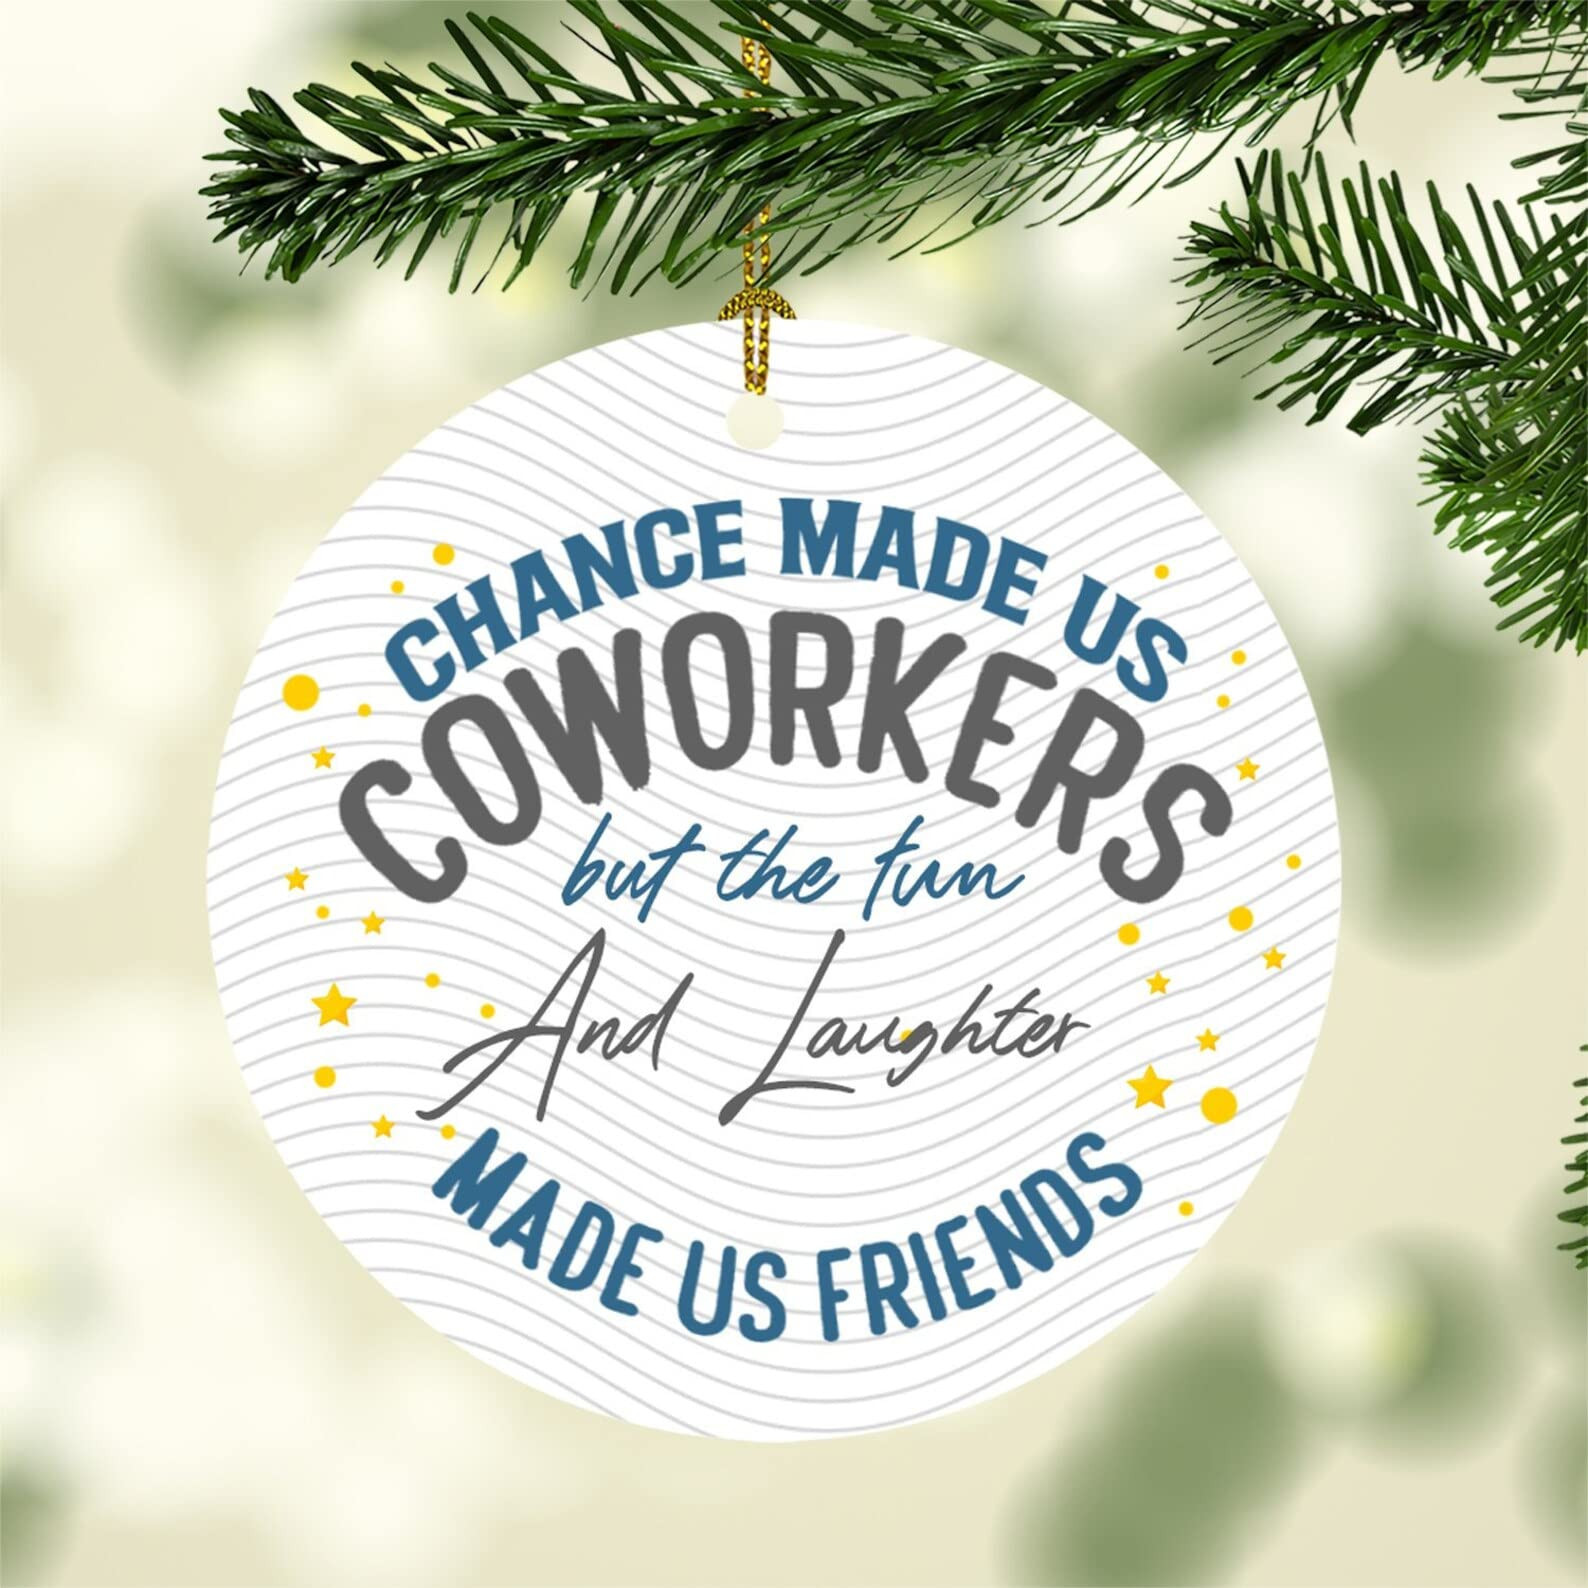 Chance Made Us Coworkers Ornament For Best Friends The Fun And Laughter We Share Made Us Friends Loving Gift For Your Bestie Christmas Decorations Ceramic Ornament Forever Friends Oval